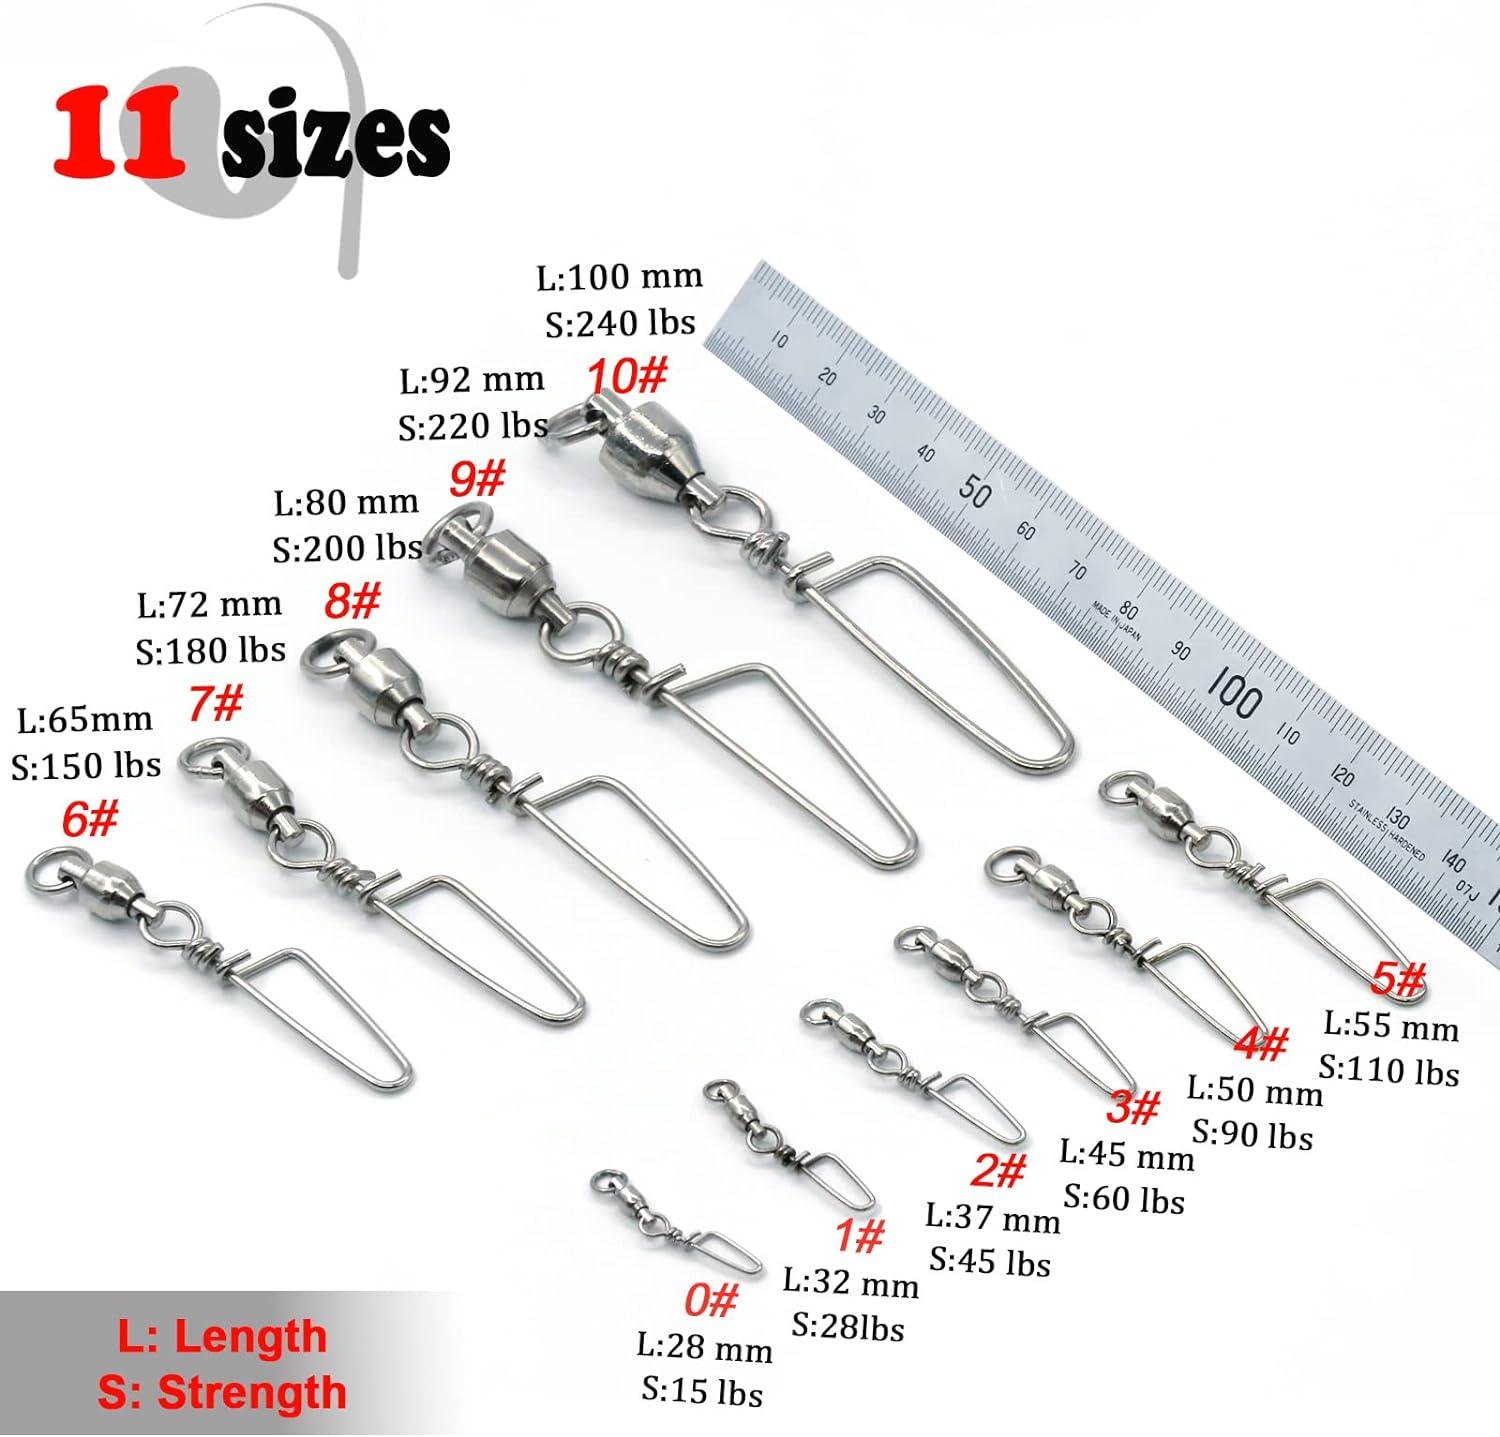 FishTrip Fishing Swivels with Snaps Coastlock 30 Pack 0#-10# Stainless  Steel Ball Bearing Swivels Fishing Tackle Connector Saltwater Freshwater  Salmon Fishing #0_15lbs_30pcs